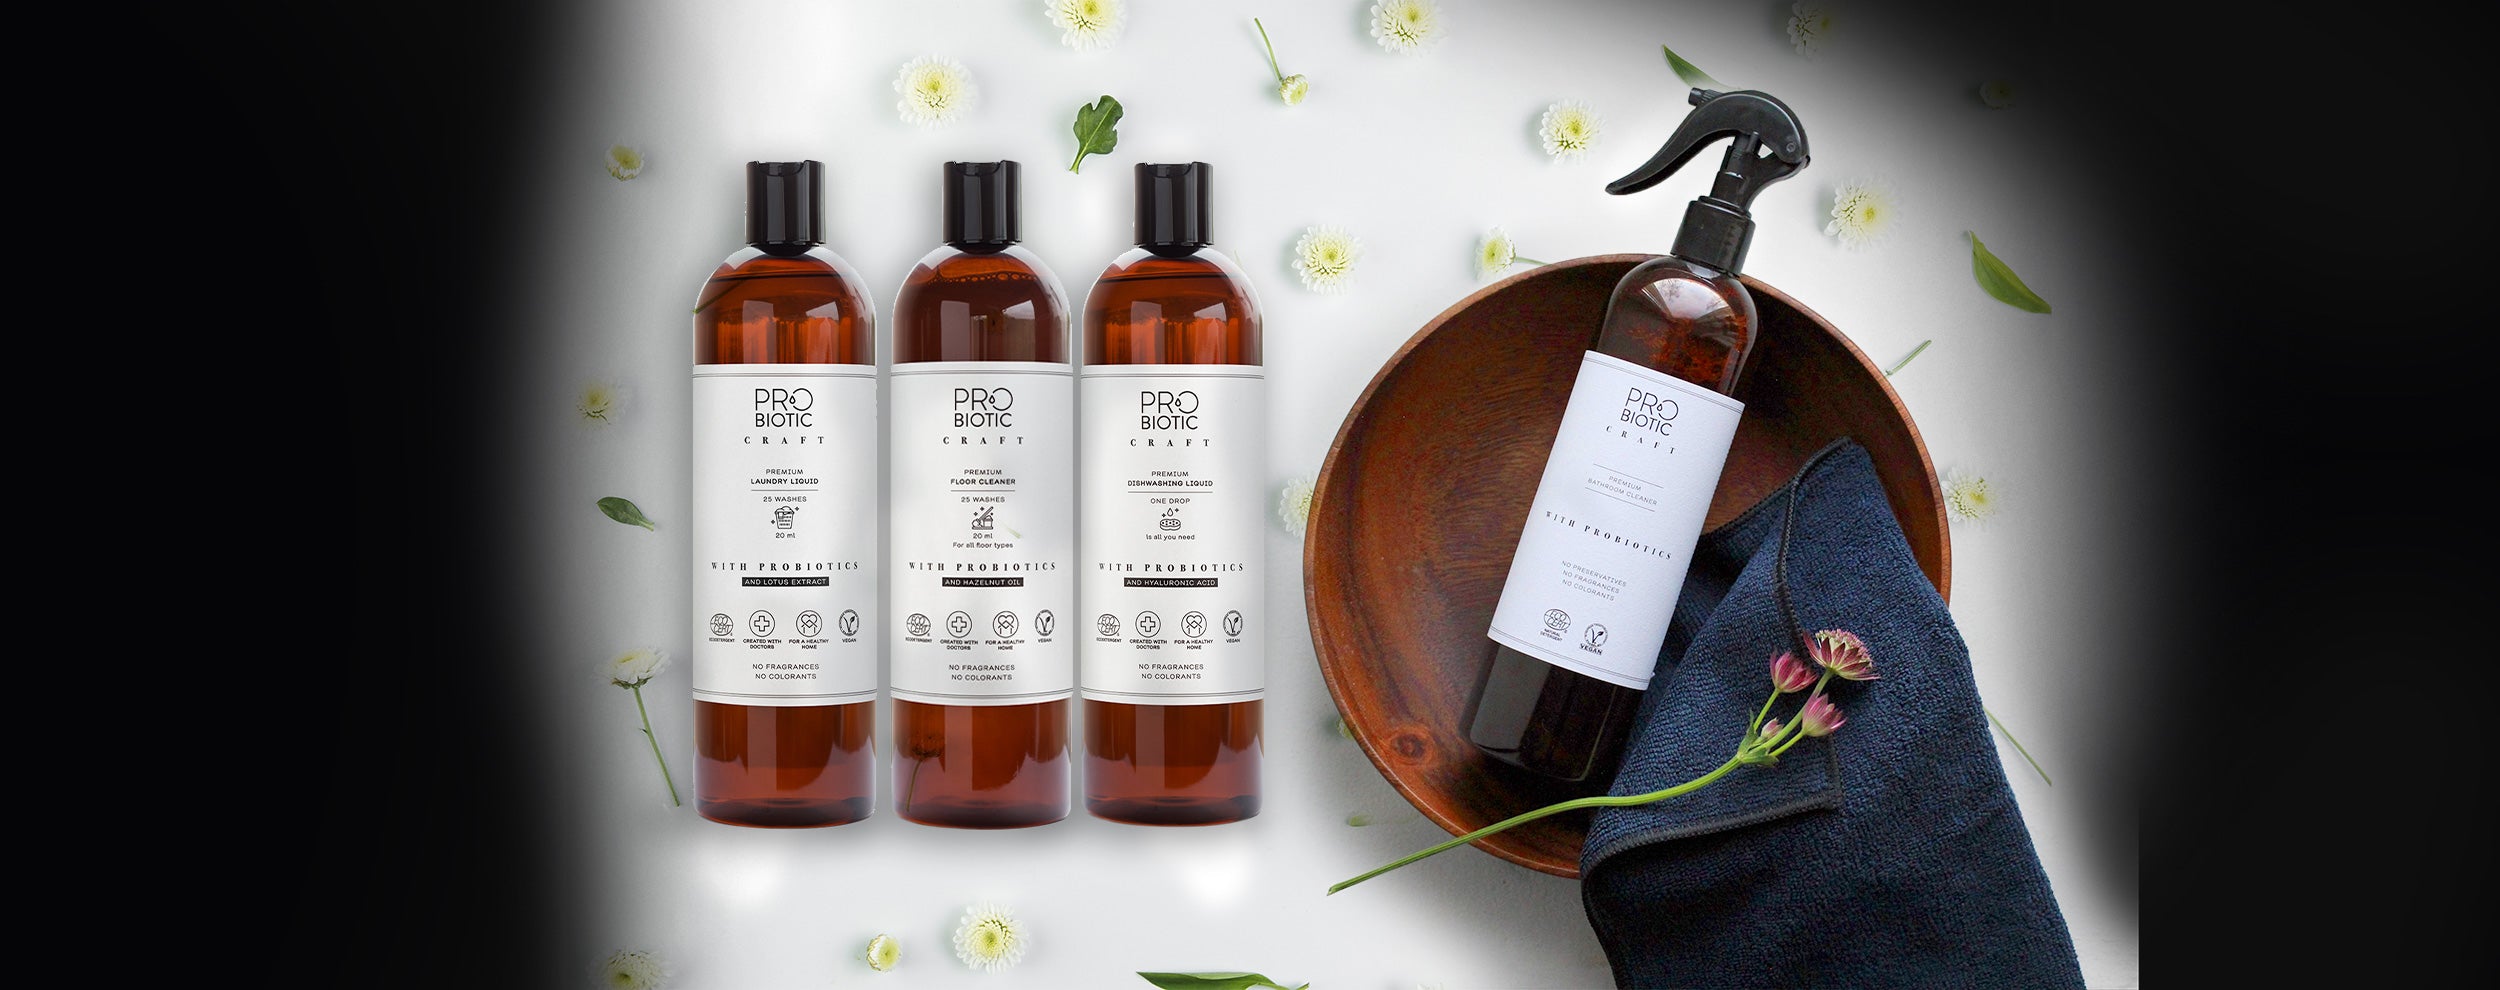 Probiotic Craft household cleaners by Lily & Loaf arranged elegantly with flowers, promoting a natural and effective clean.